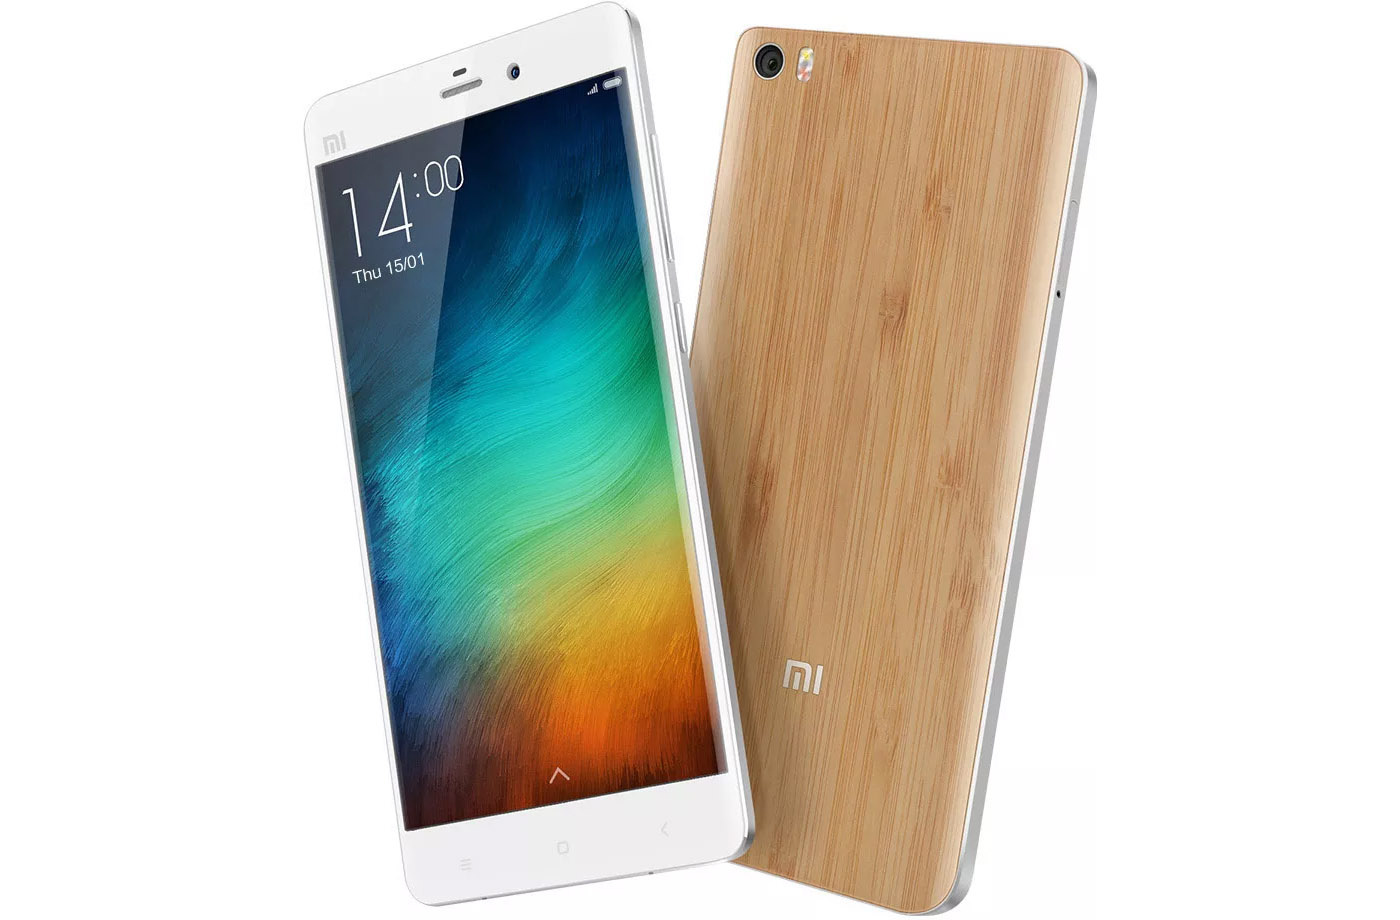  xiaomi my note timber 